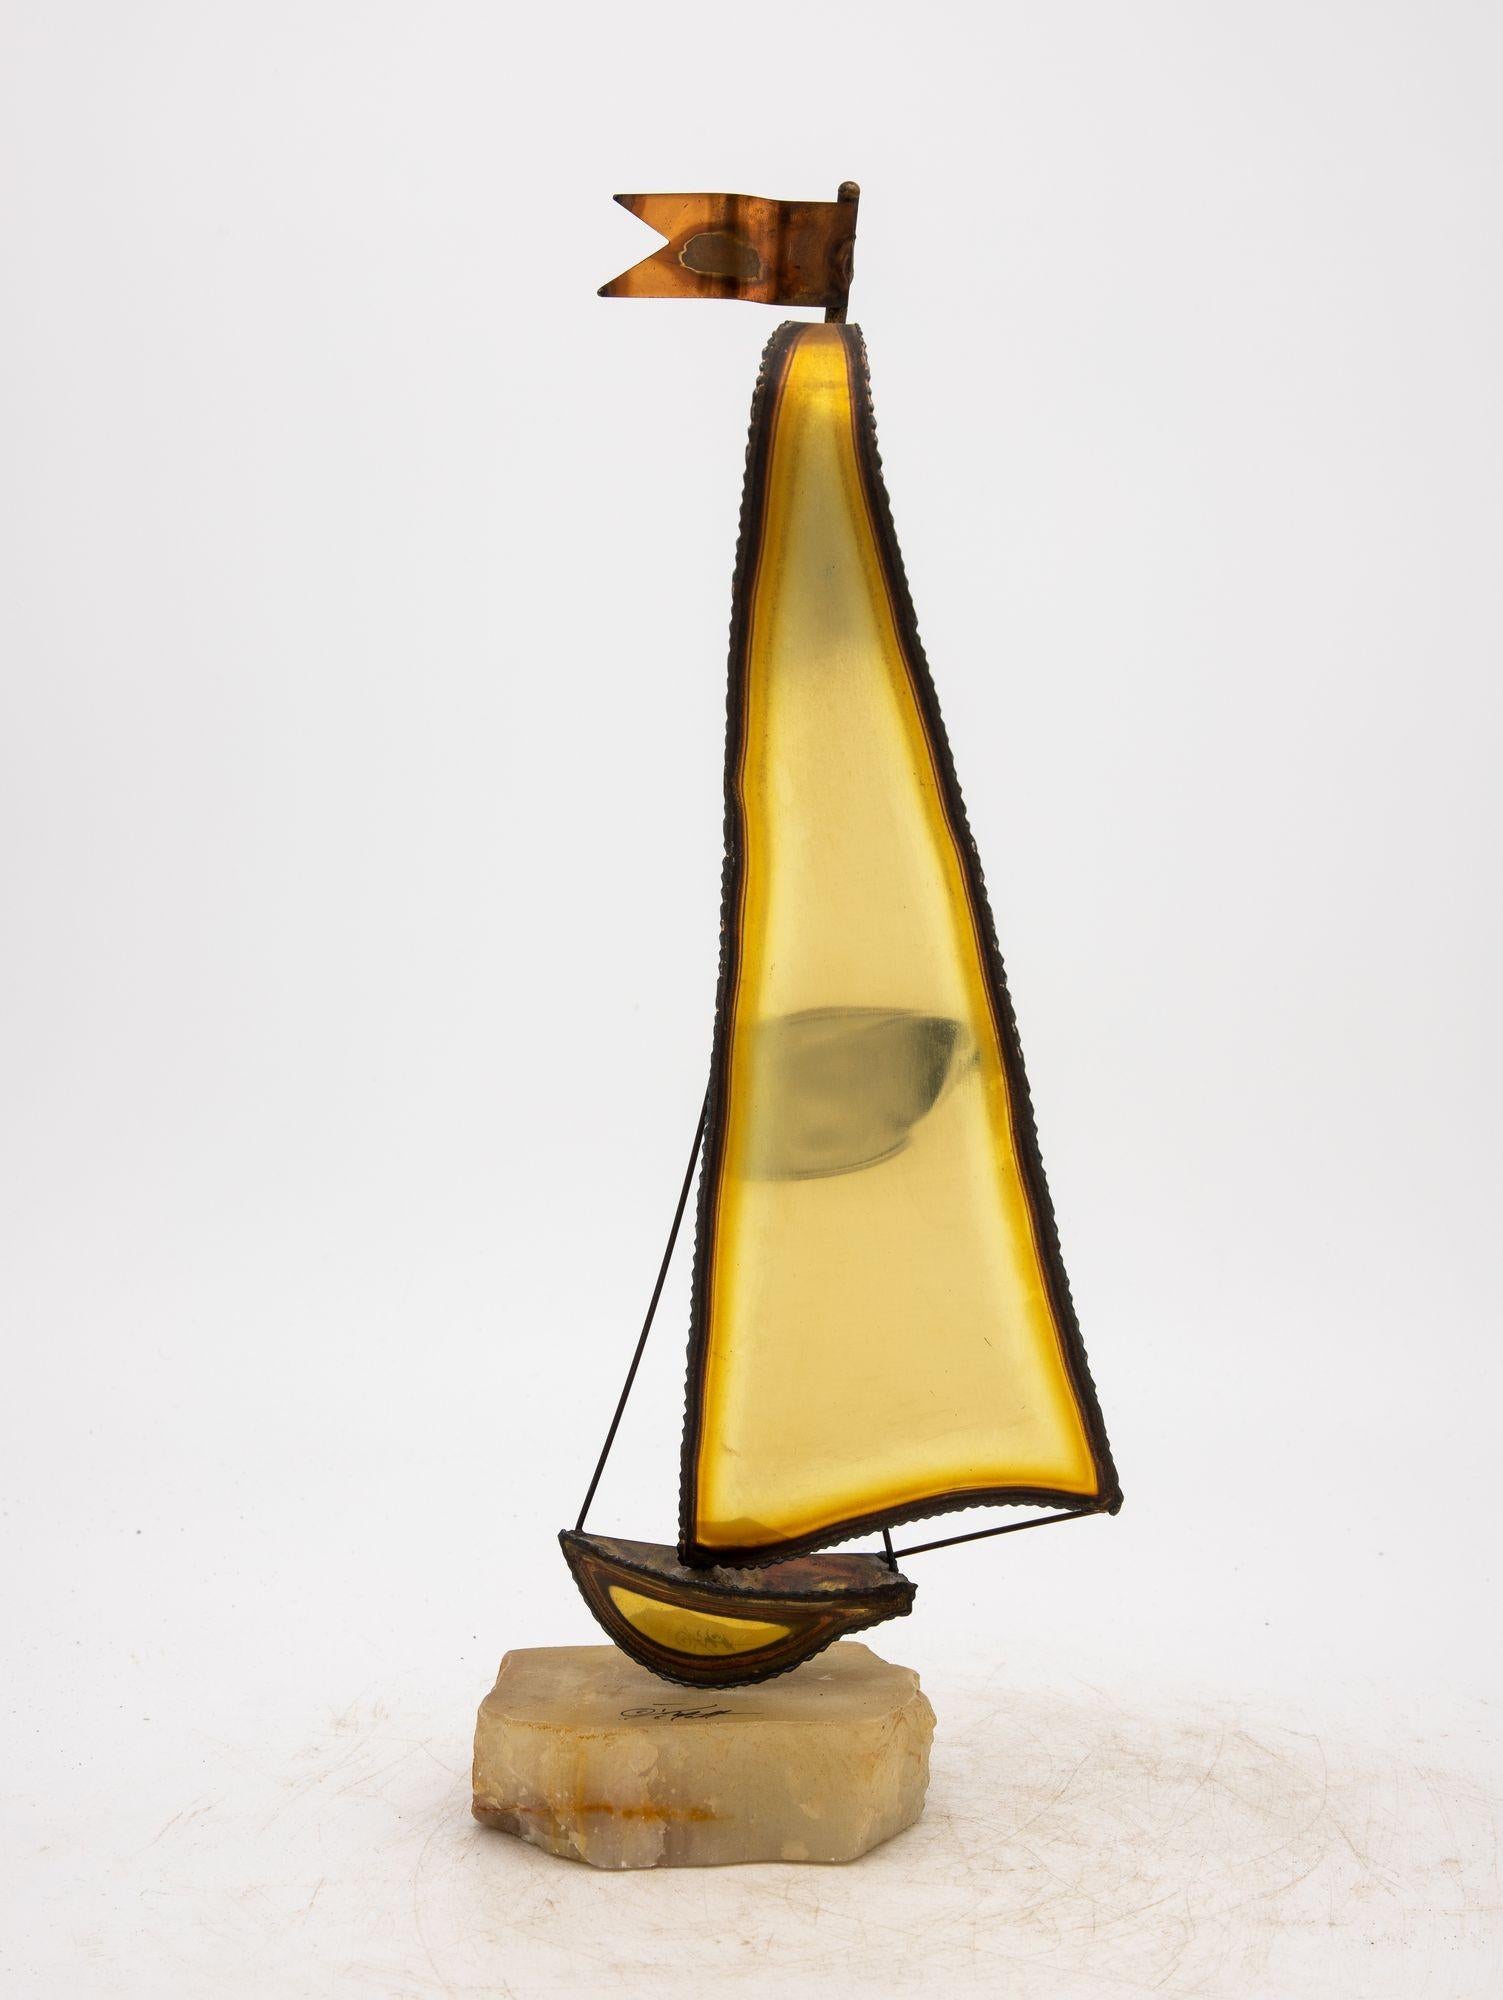 A brass Brutalist-style sailboat sculpture of captivating artistry rests upon an onyx base, an iconic piece signed by DeMott. Made in the Mid 20th Century, the sculpture's sleek lines and burnished brass evoke the grace of maritime beauty. The